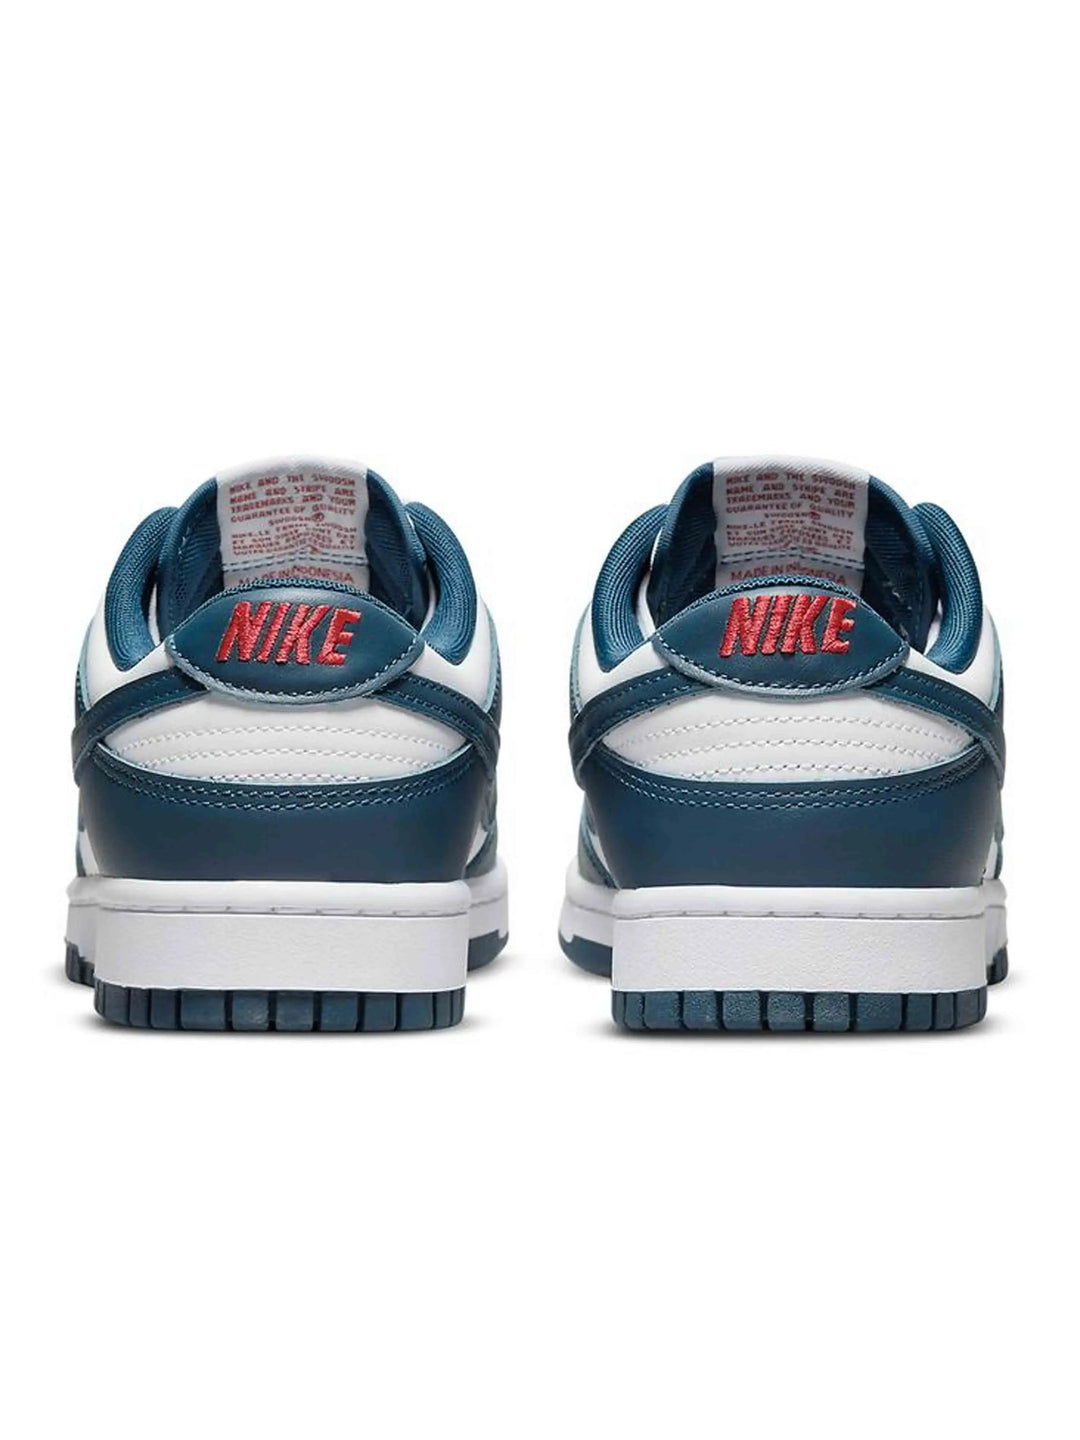 Nike Dunk Low Valerian Blue (REPLACEMENT BOX)